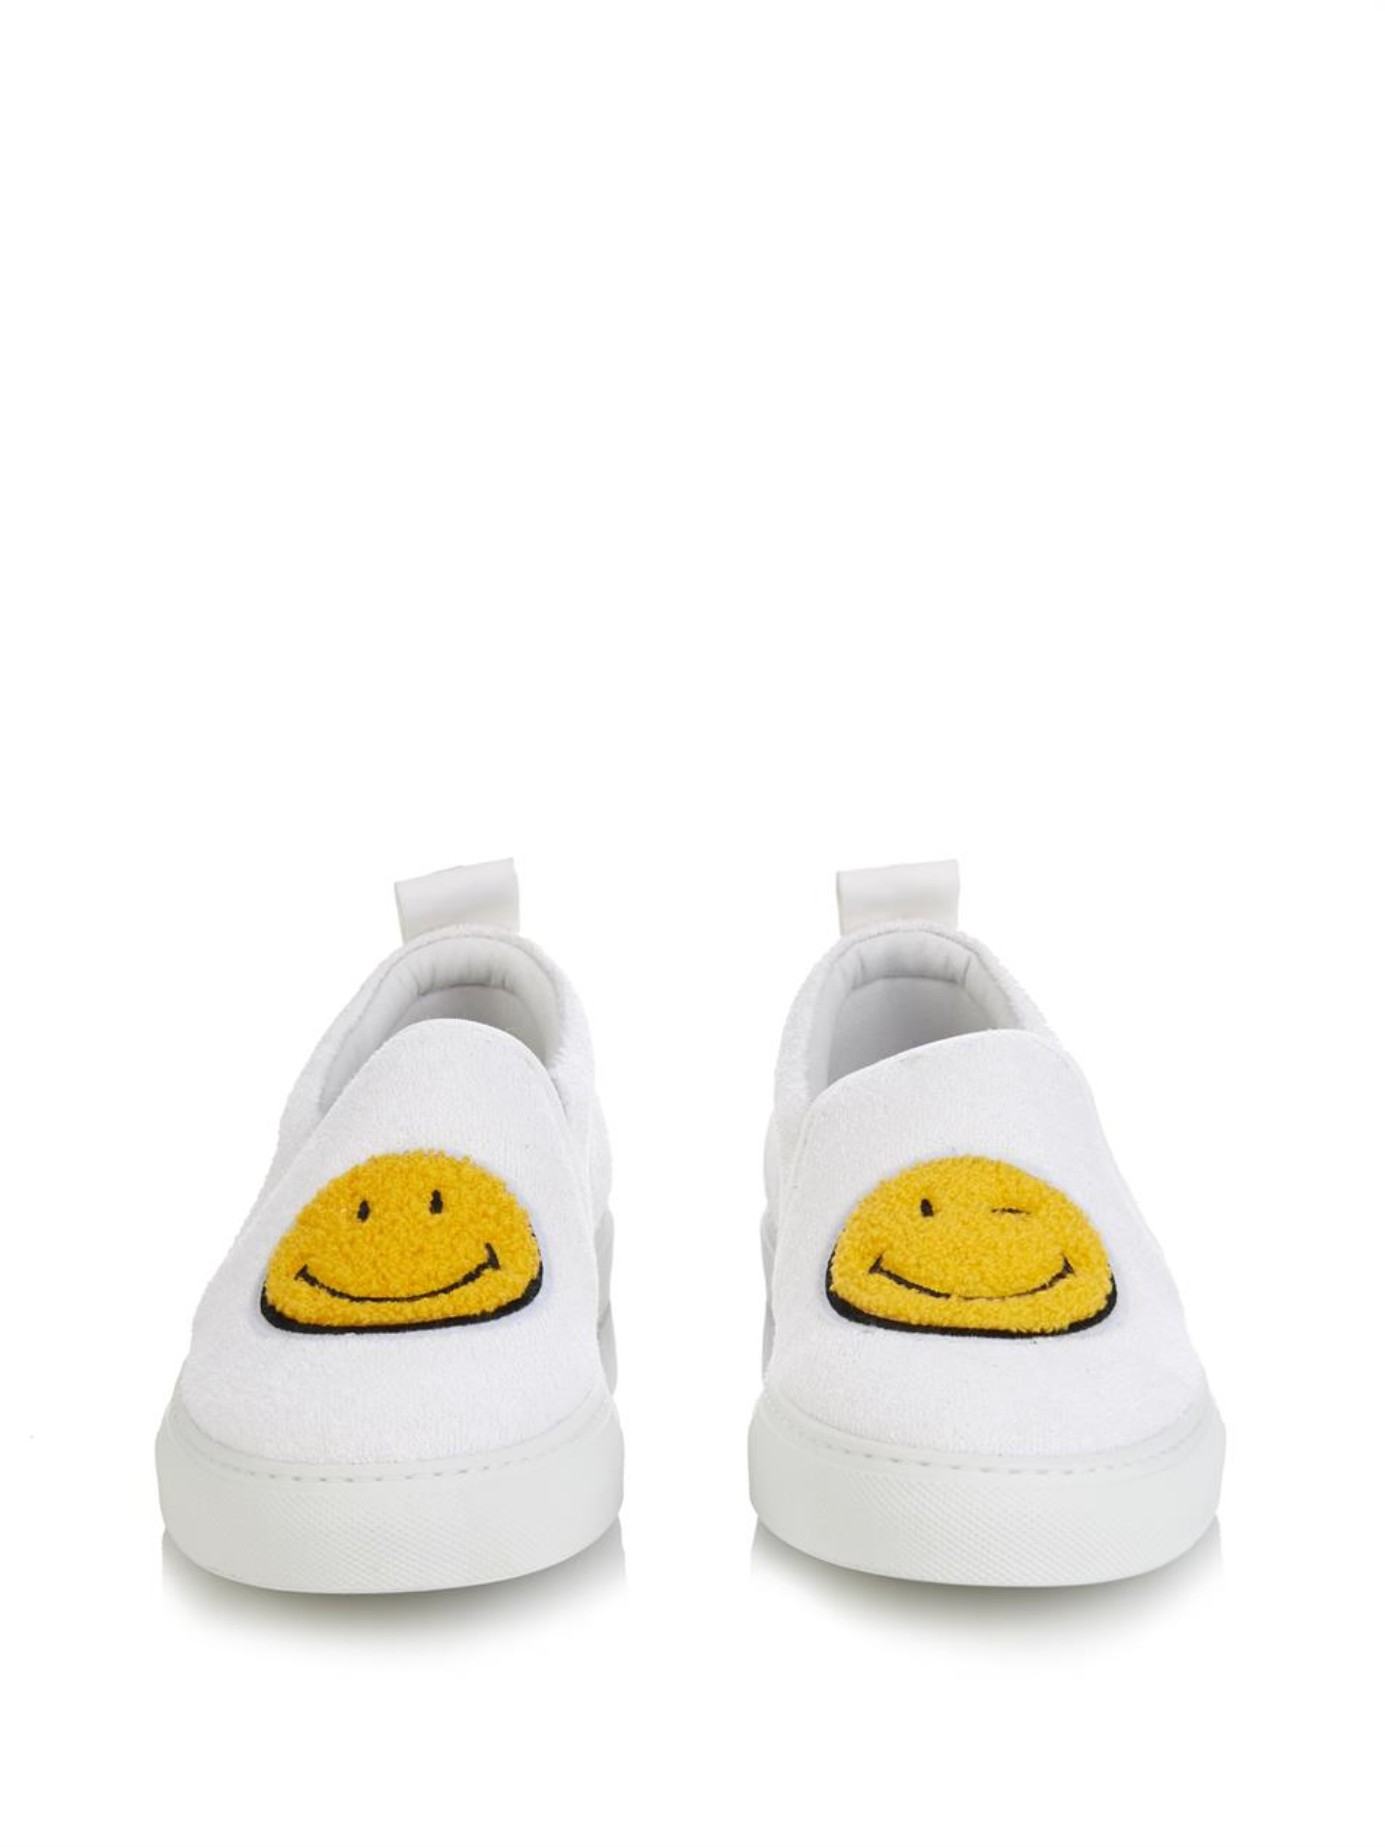 Joshua Sanders Smiley-Face Terry-Cloth Sneakers in White - Lyst